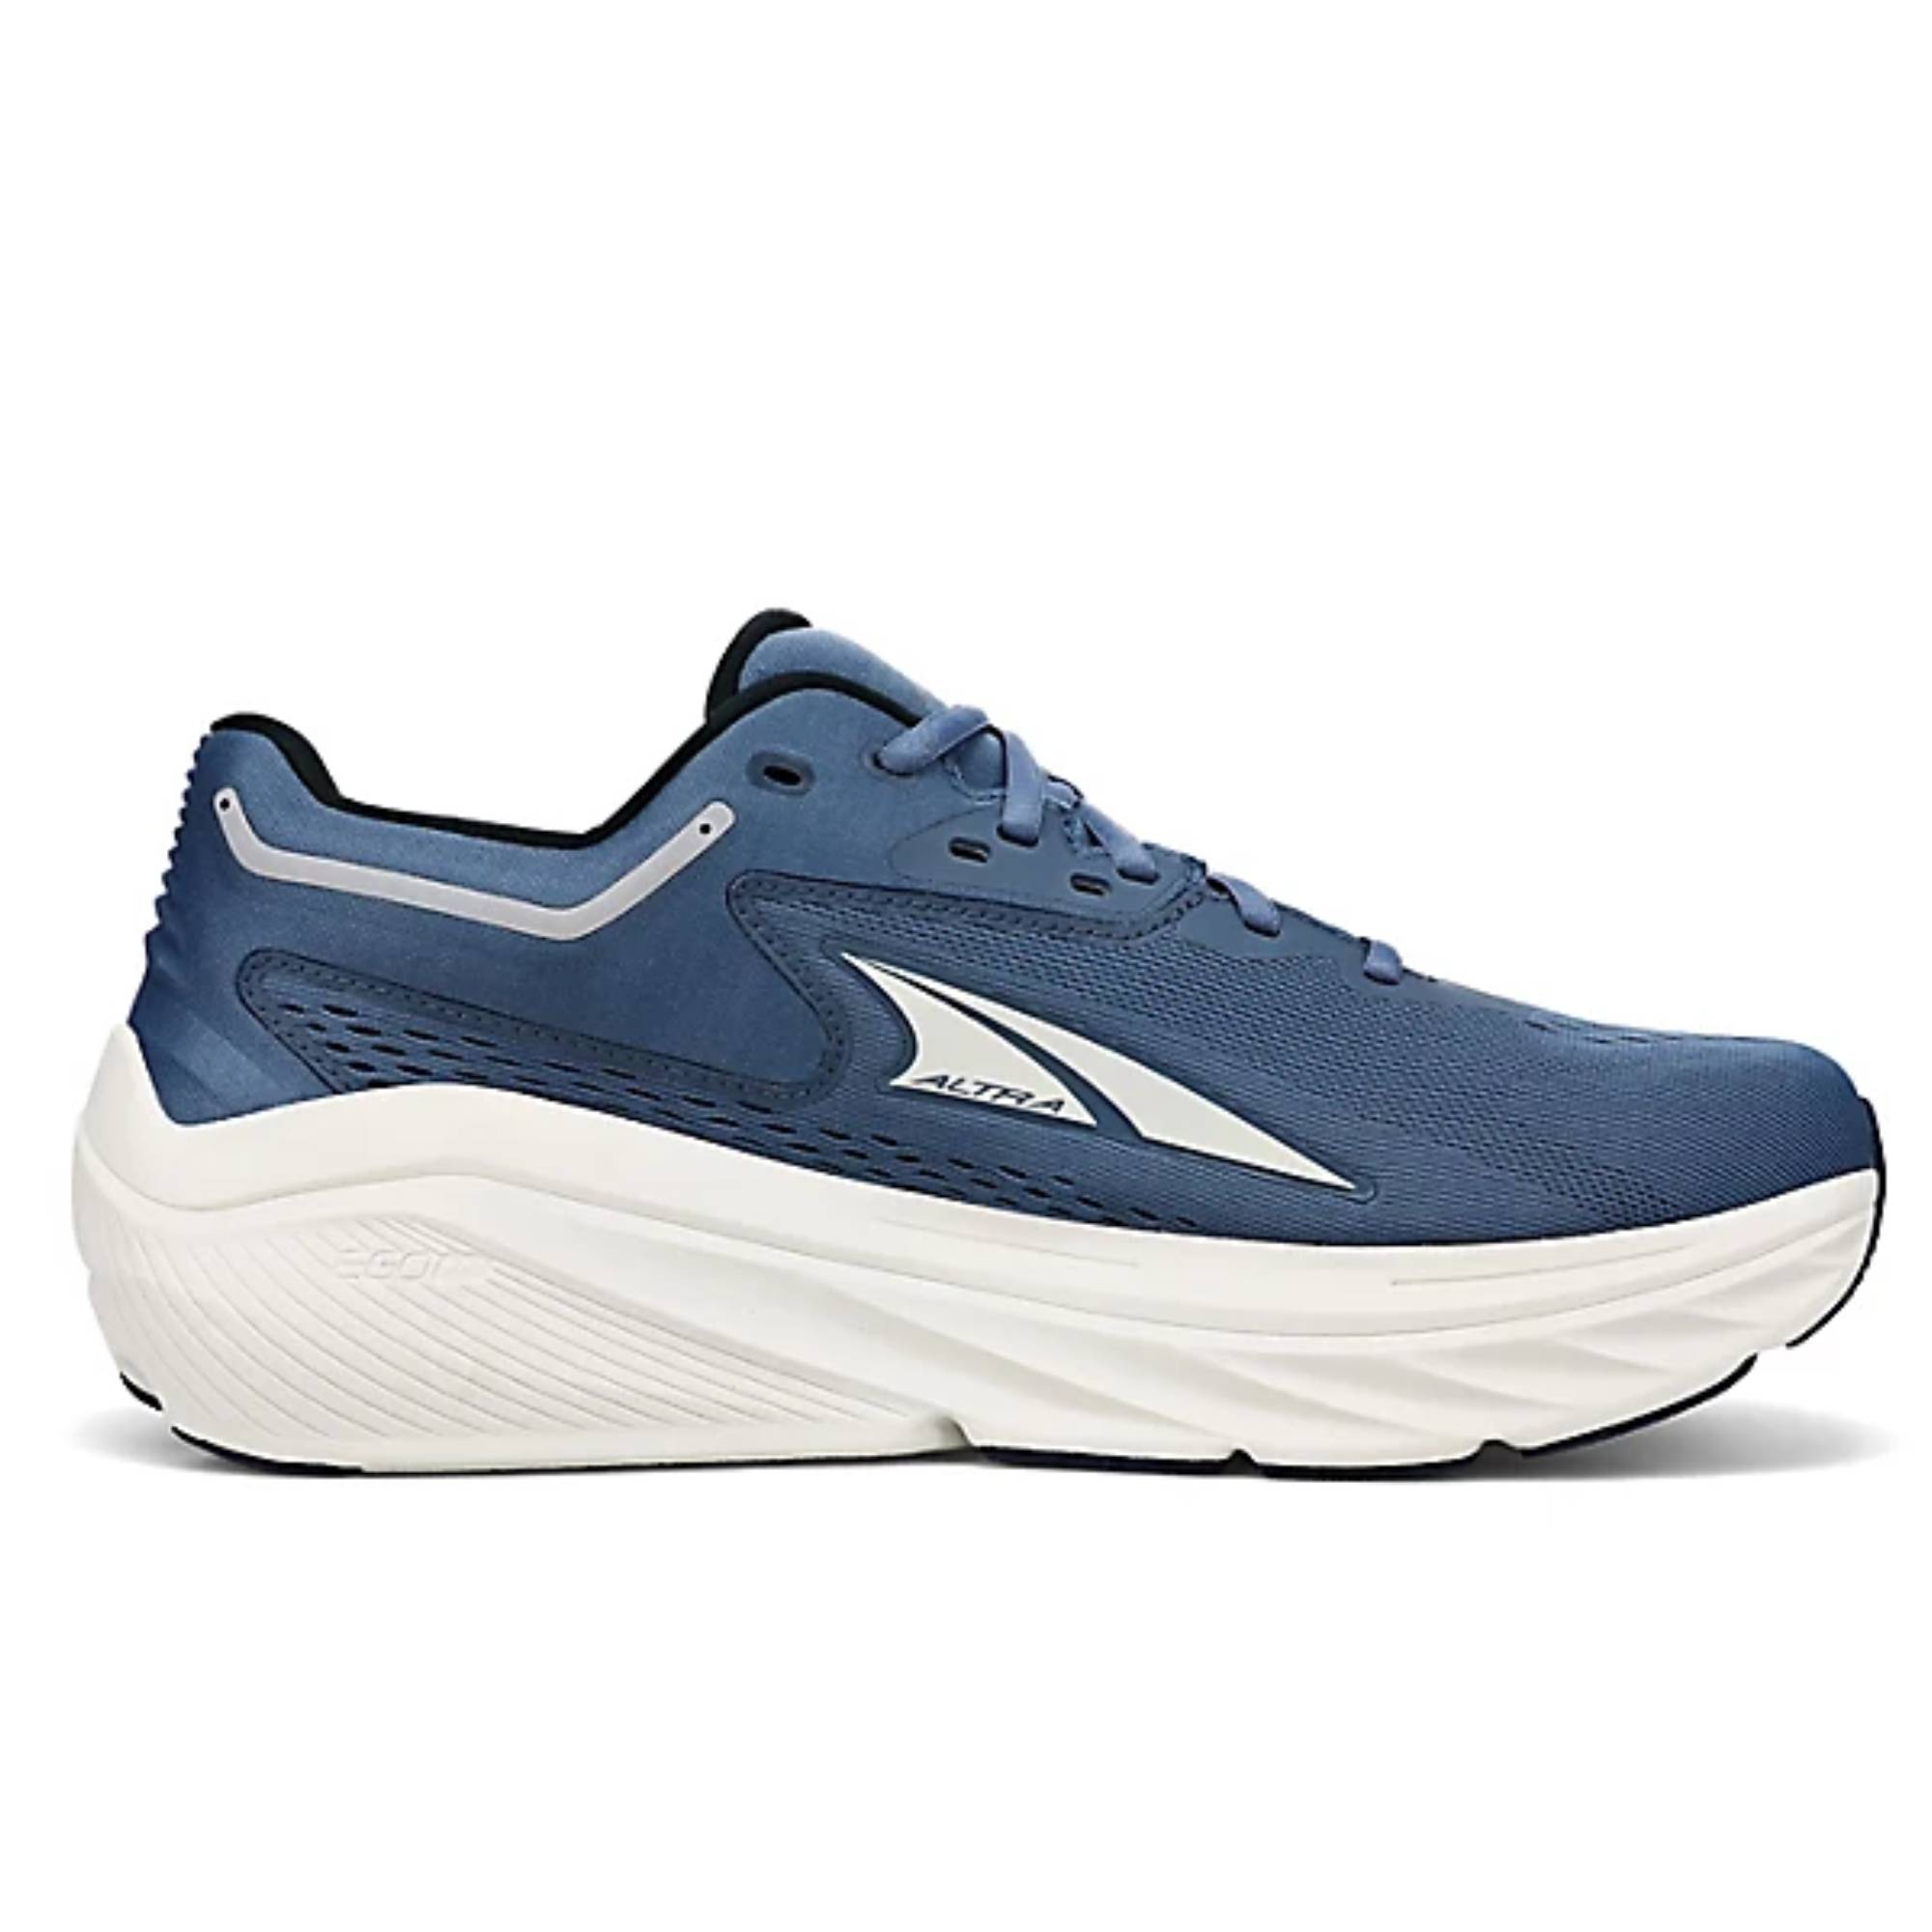 Altra men's via olympus - The Running Well Store